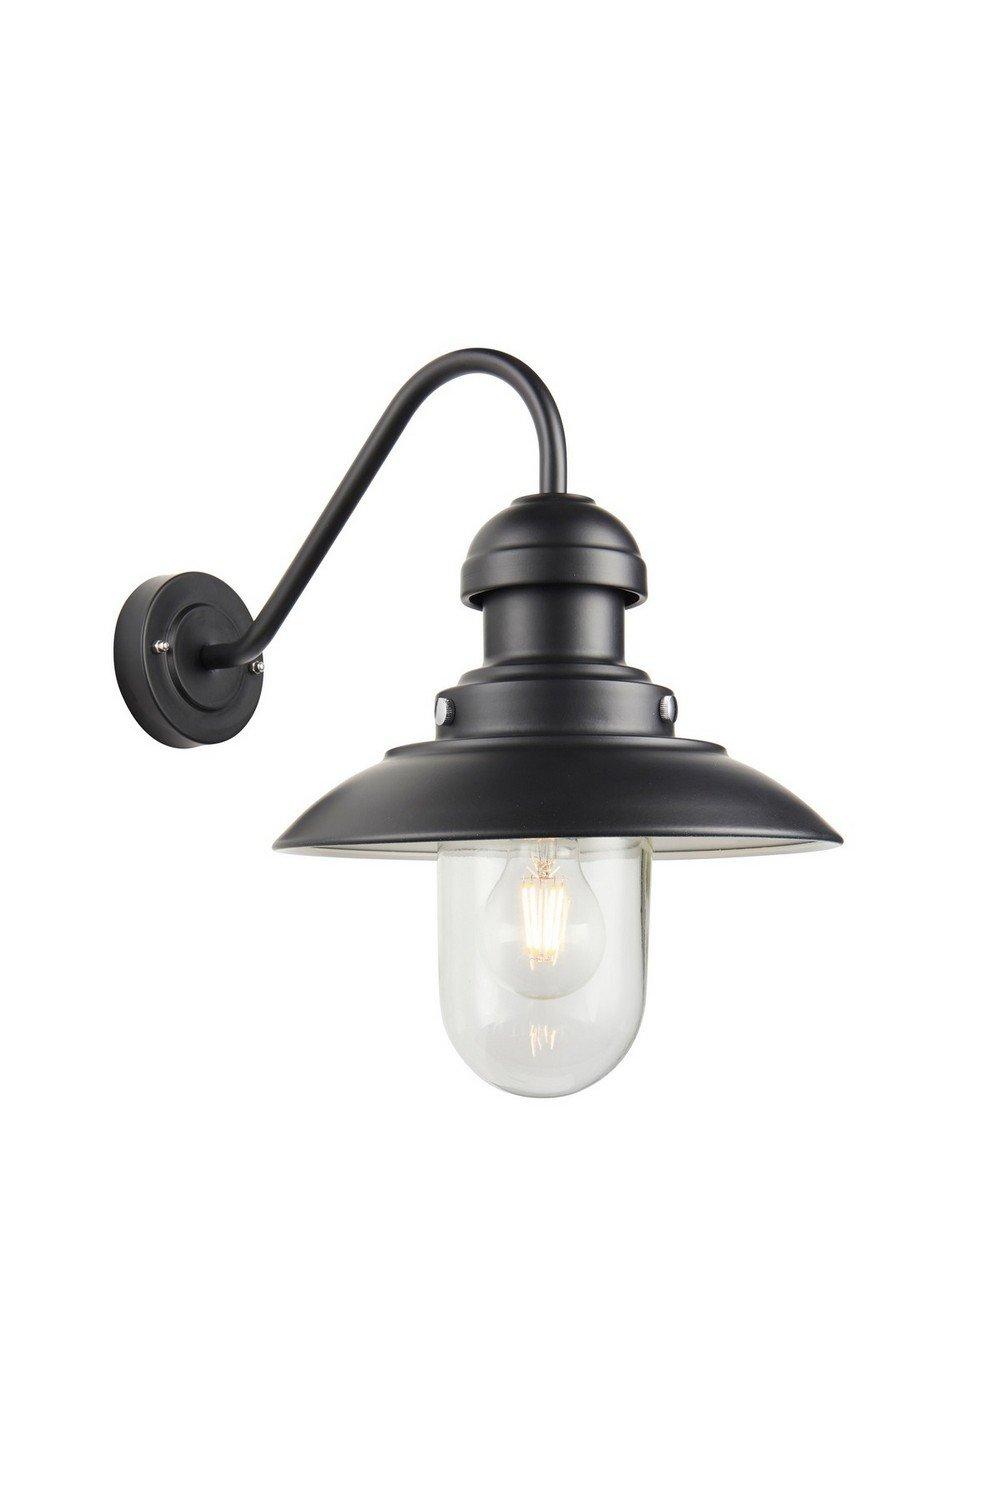 Hereford Traditional Outdoor Dome Wall Light Matt Black Glass Shade IP44